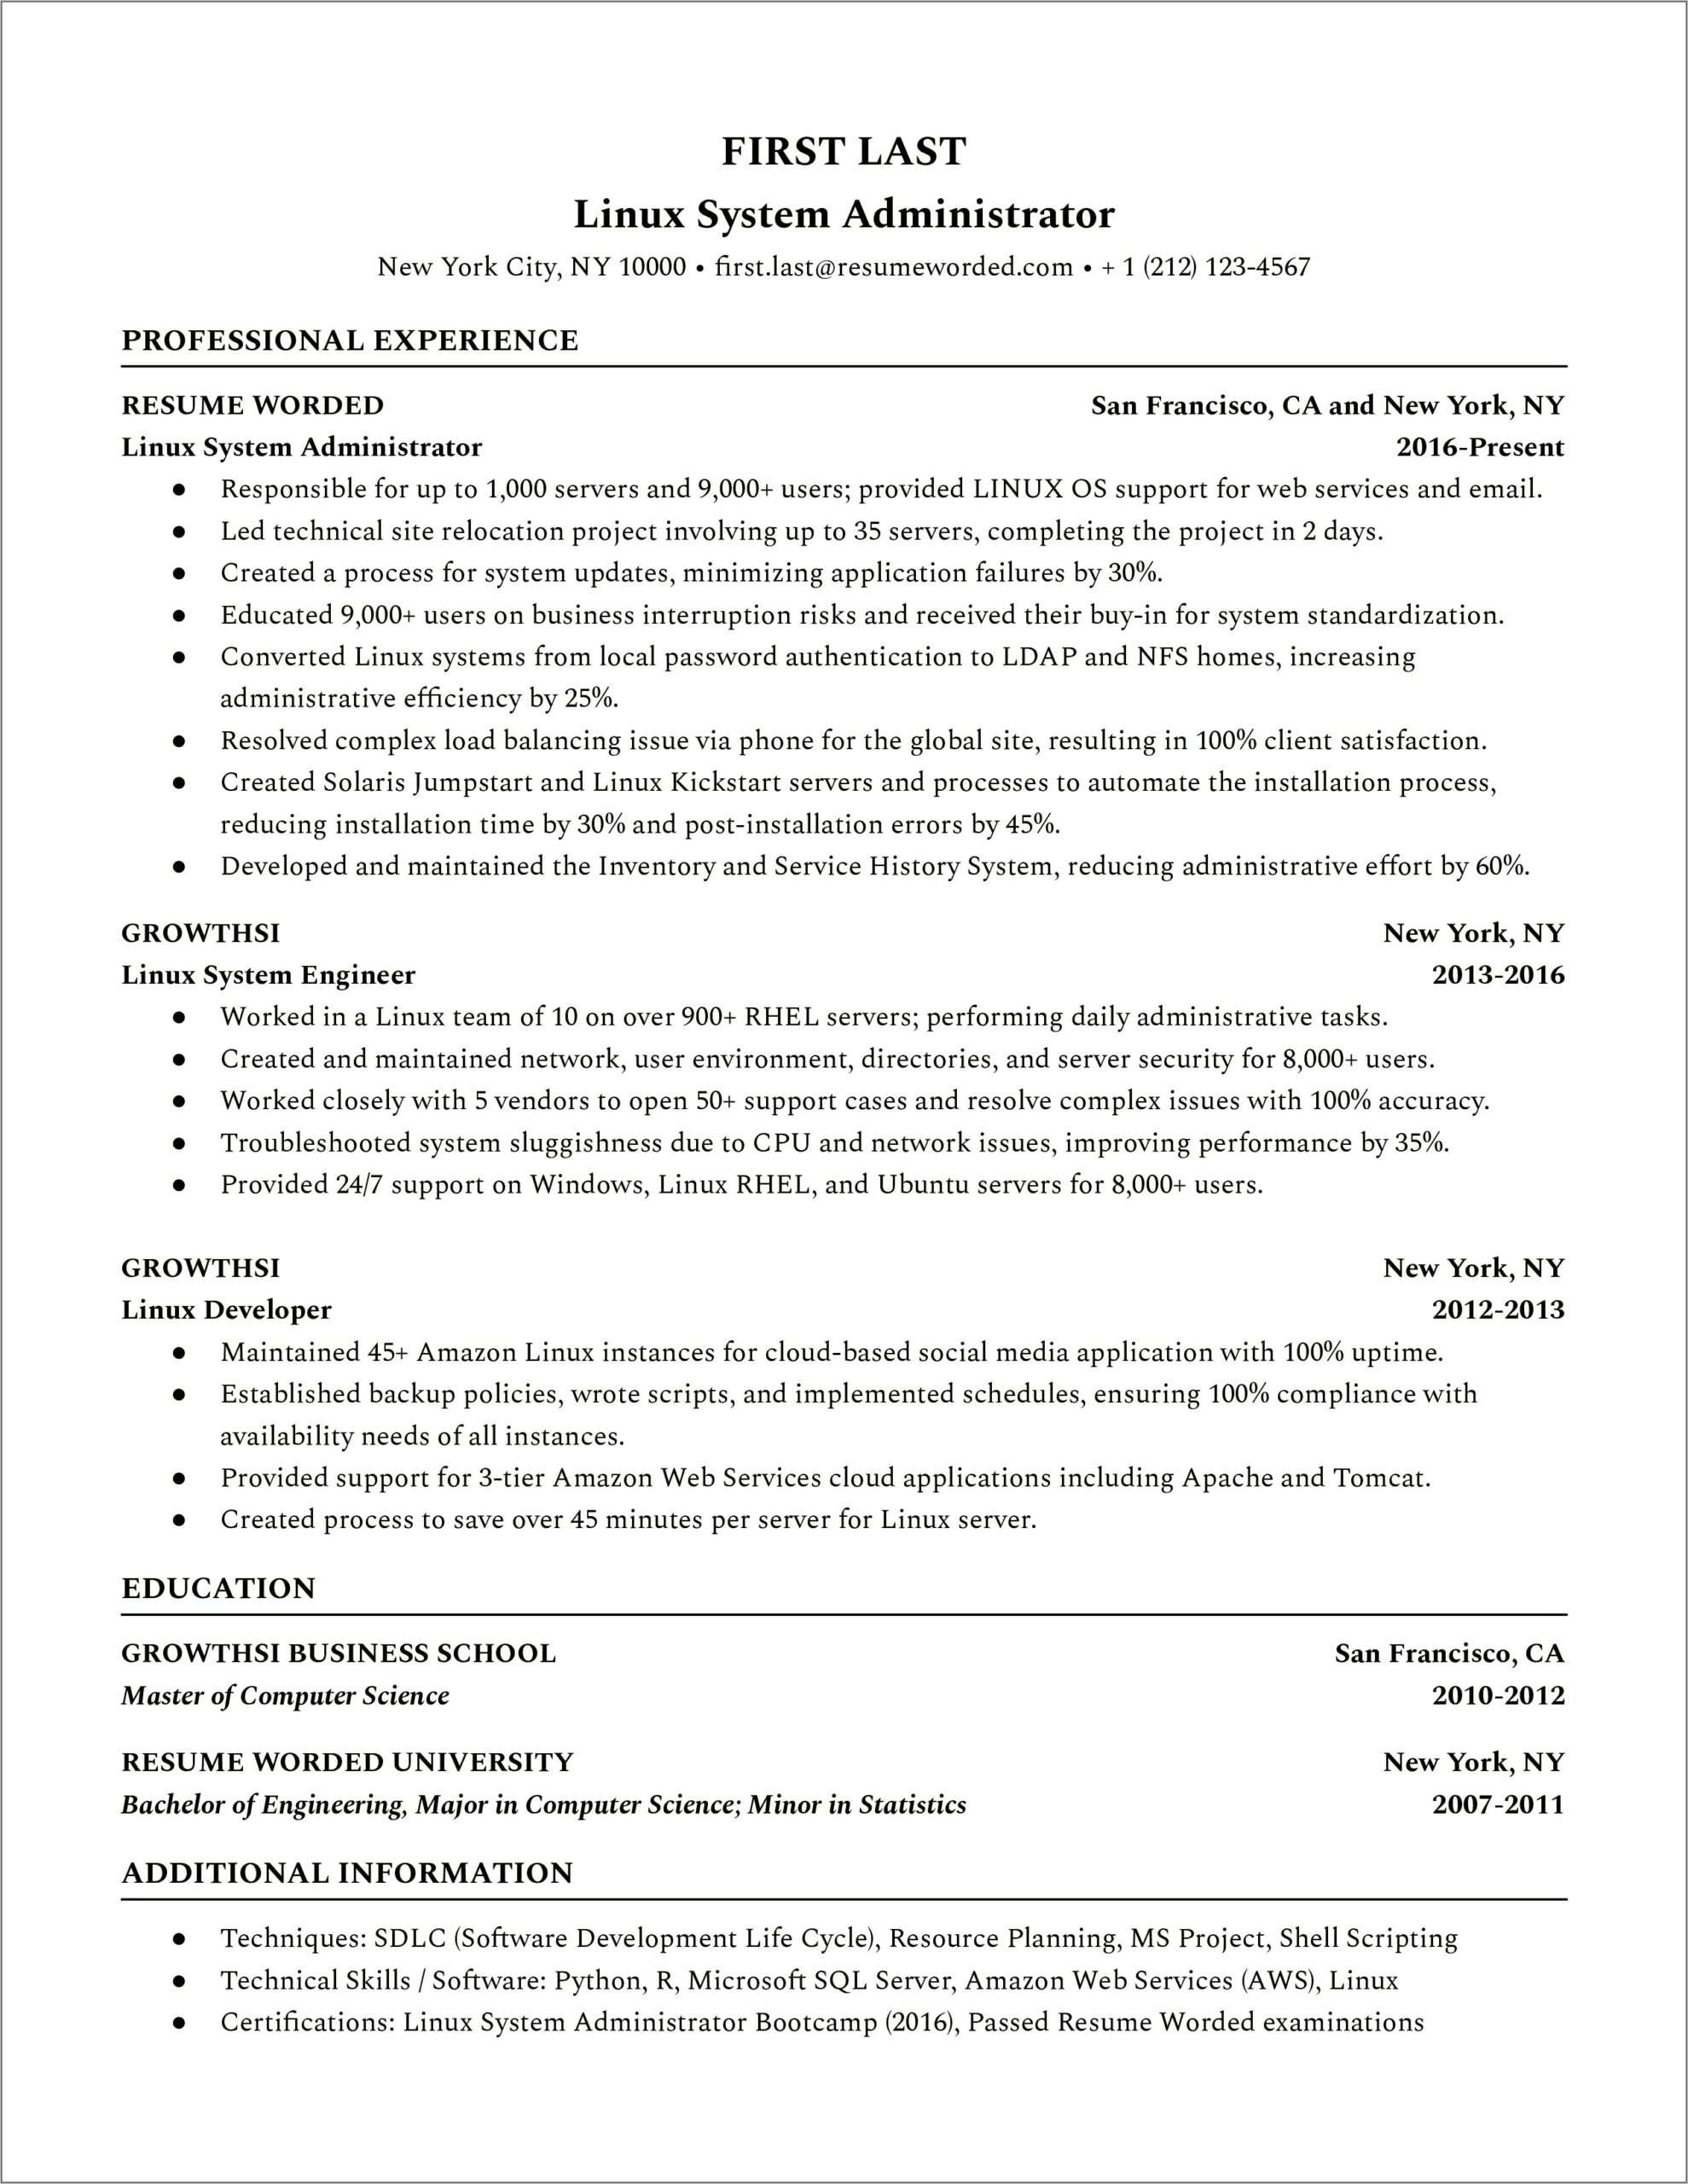 Linux As A Skill In Resume